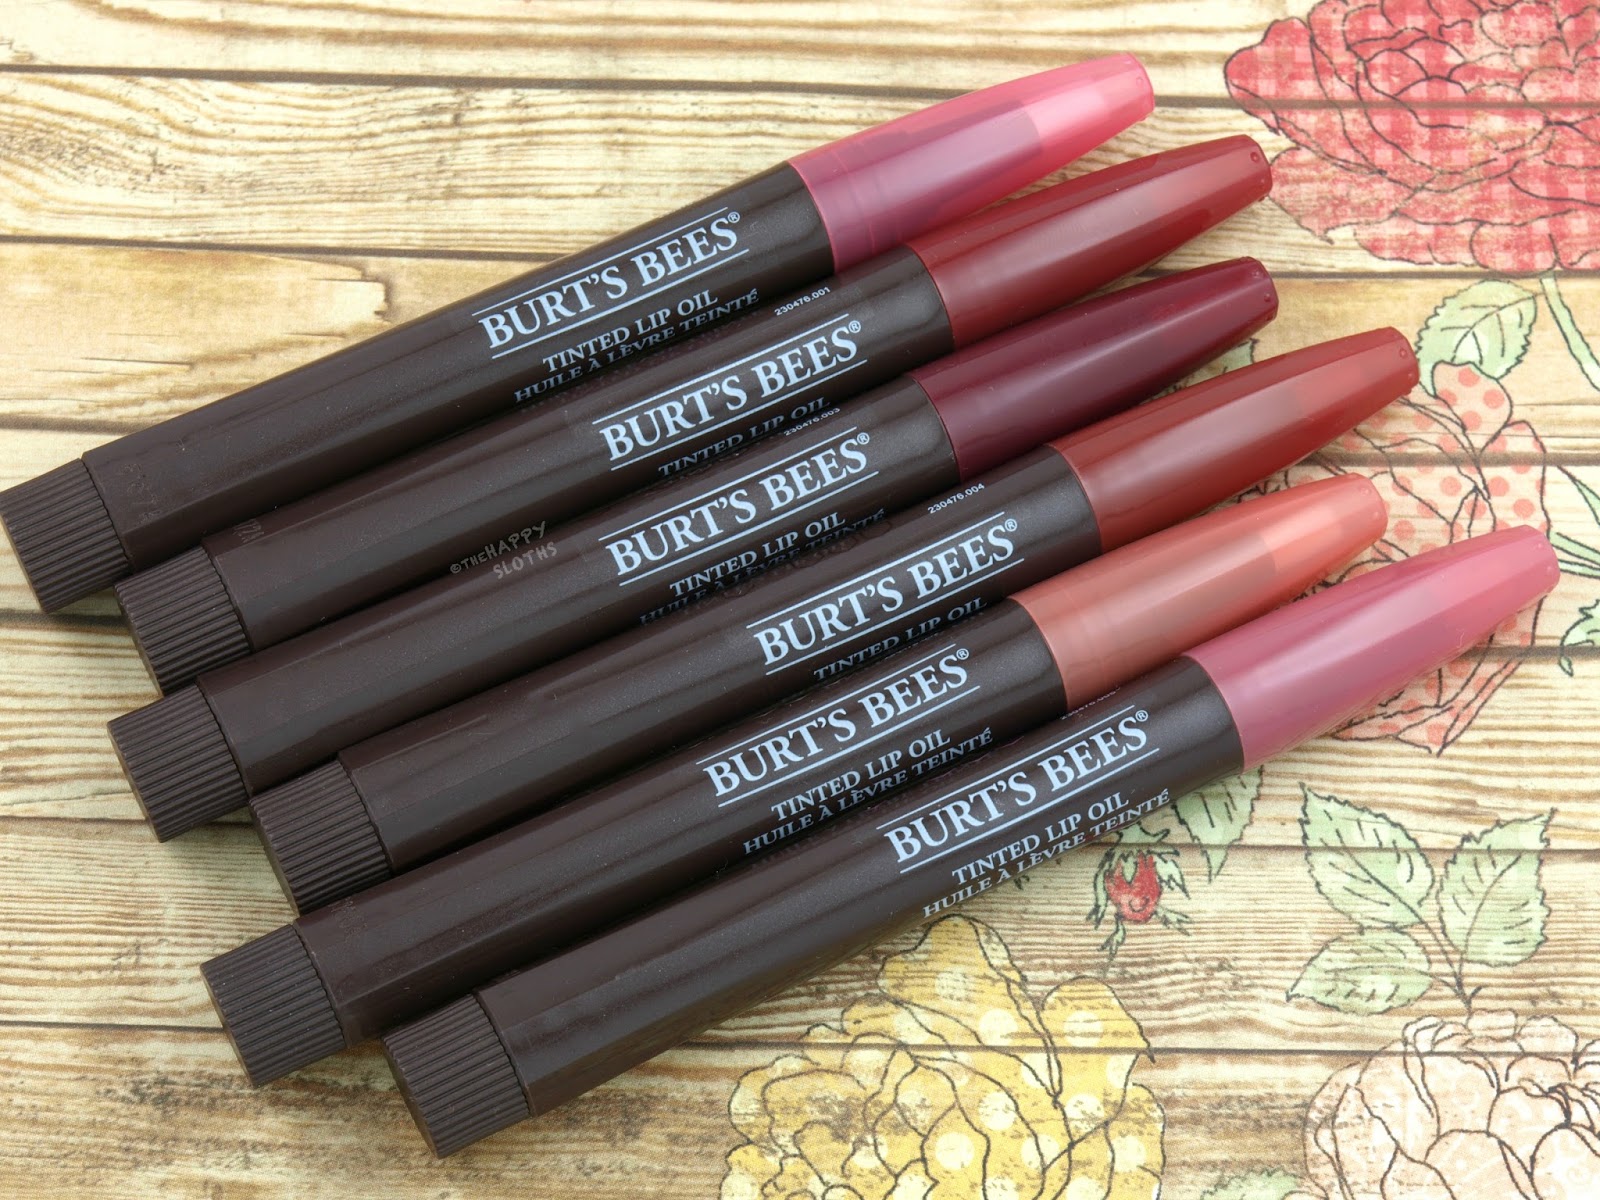 Burt's Bees Tinted Lip Oil: Review and Swatches